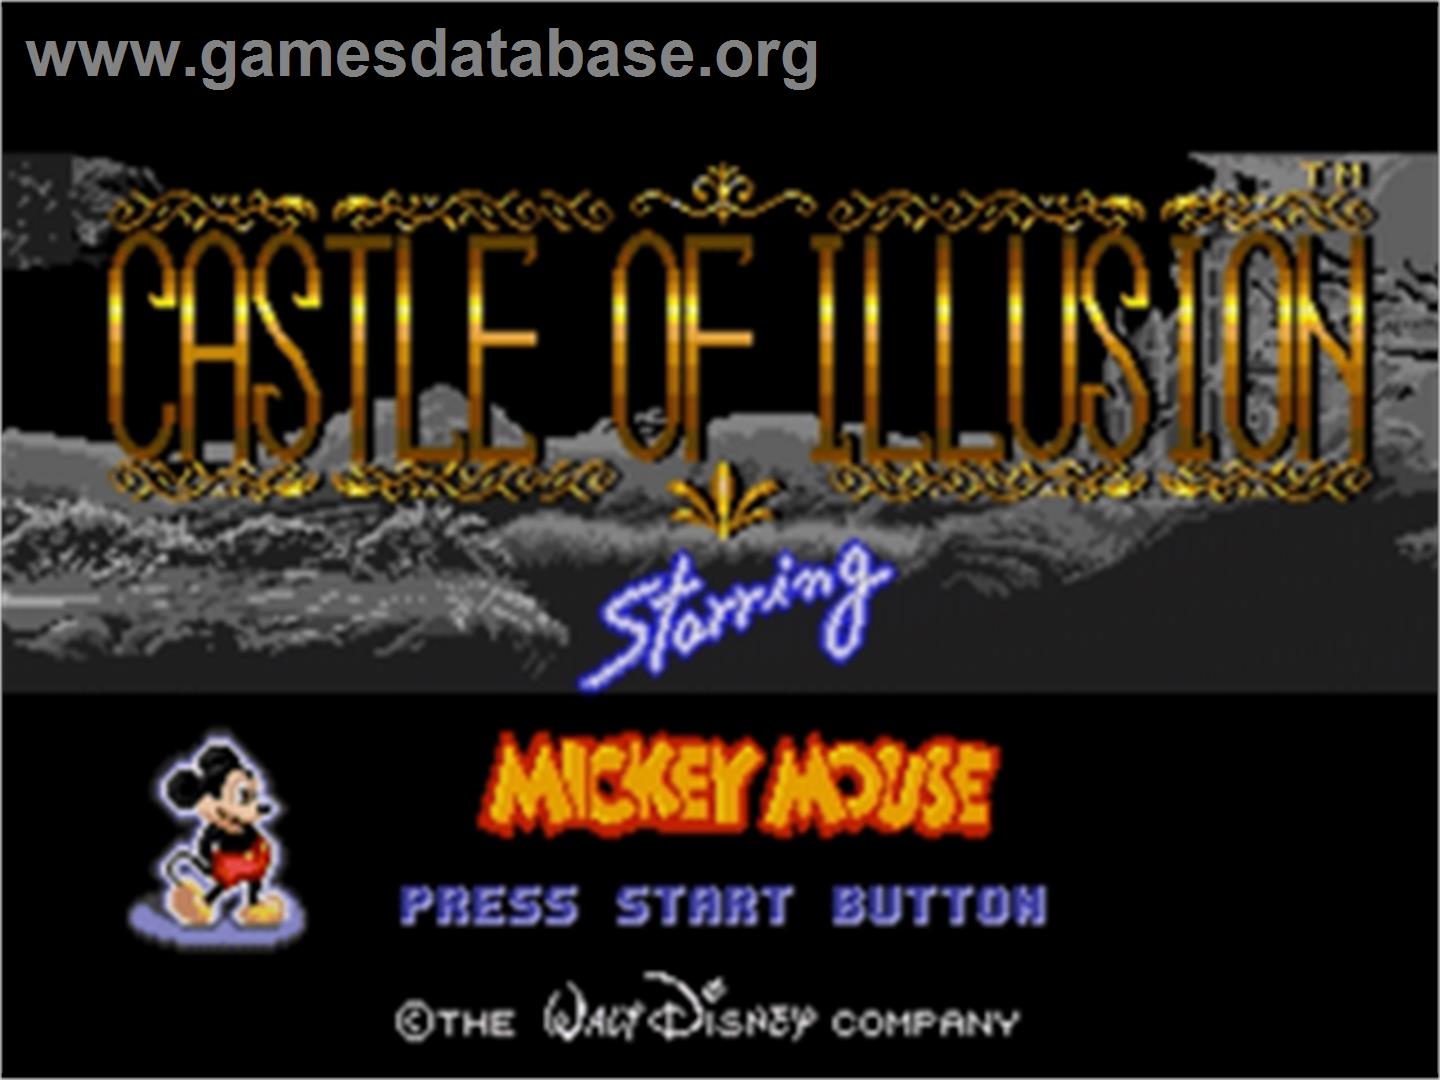 Castle of Illusion starring Mickey Mouse - Sega Nomad - Artwork - Title Screen